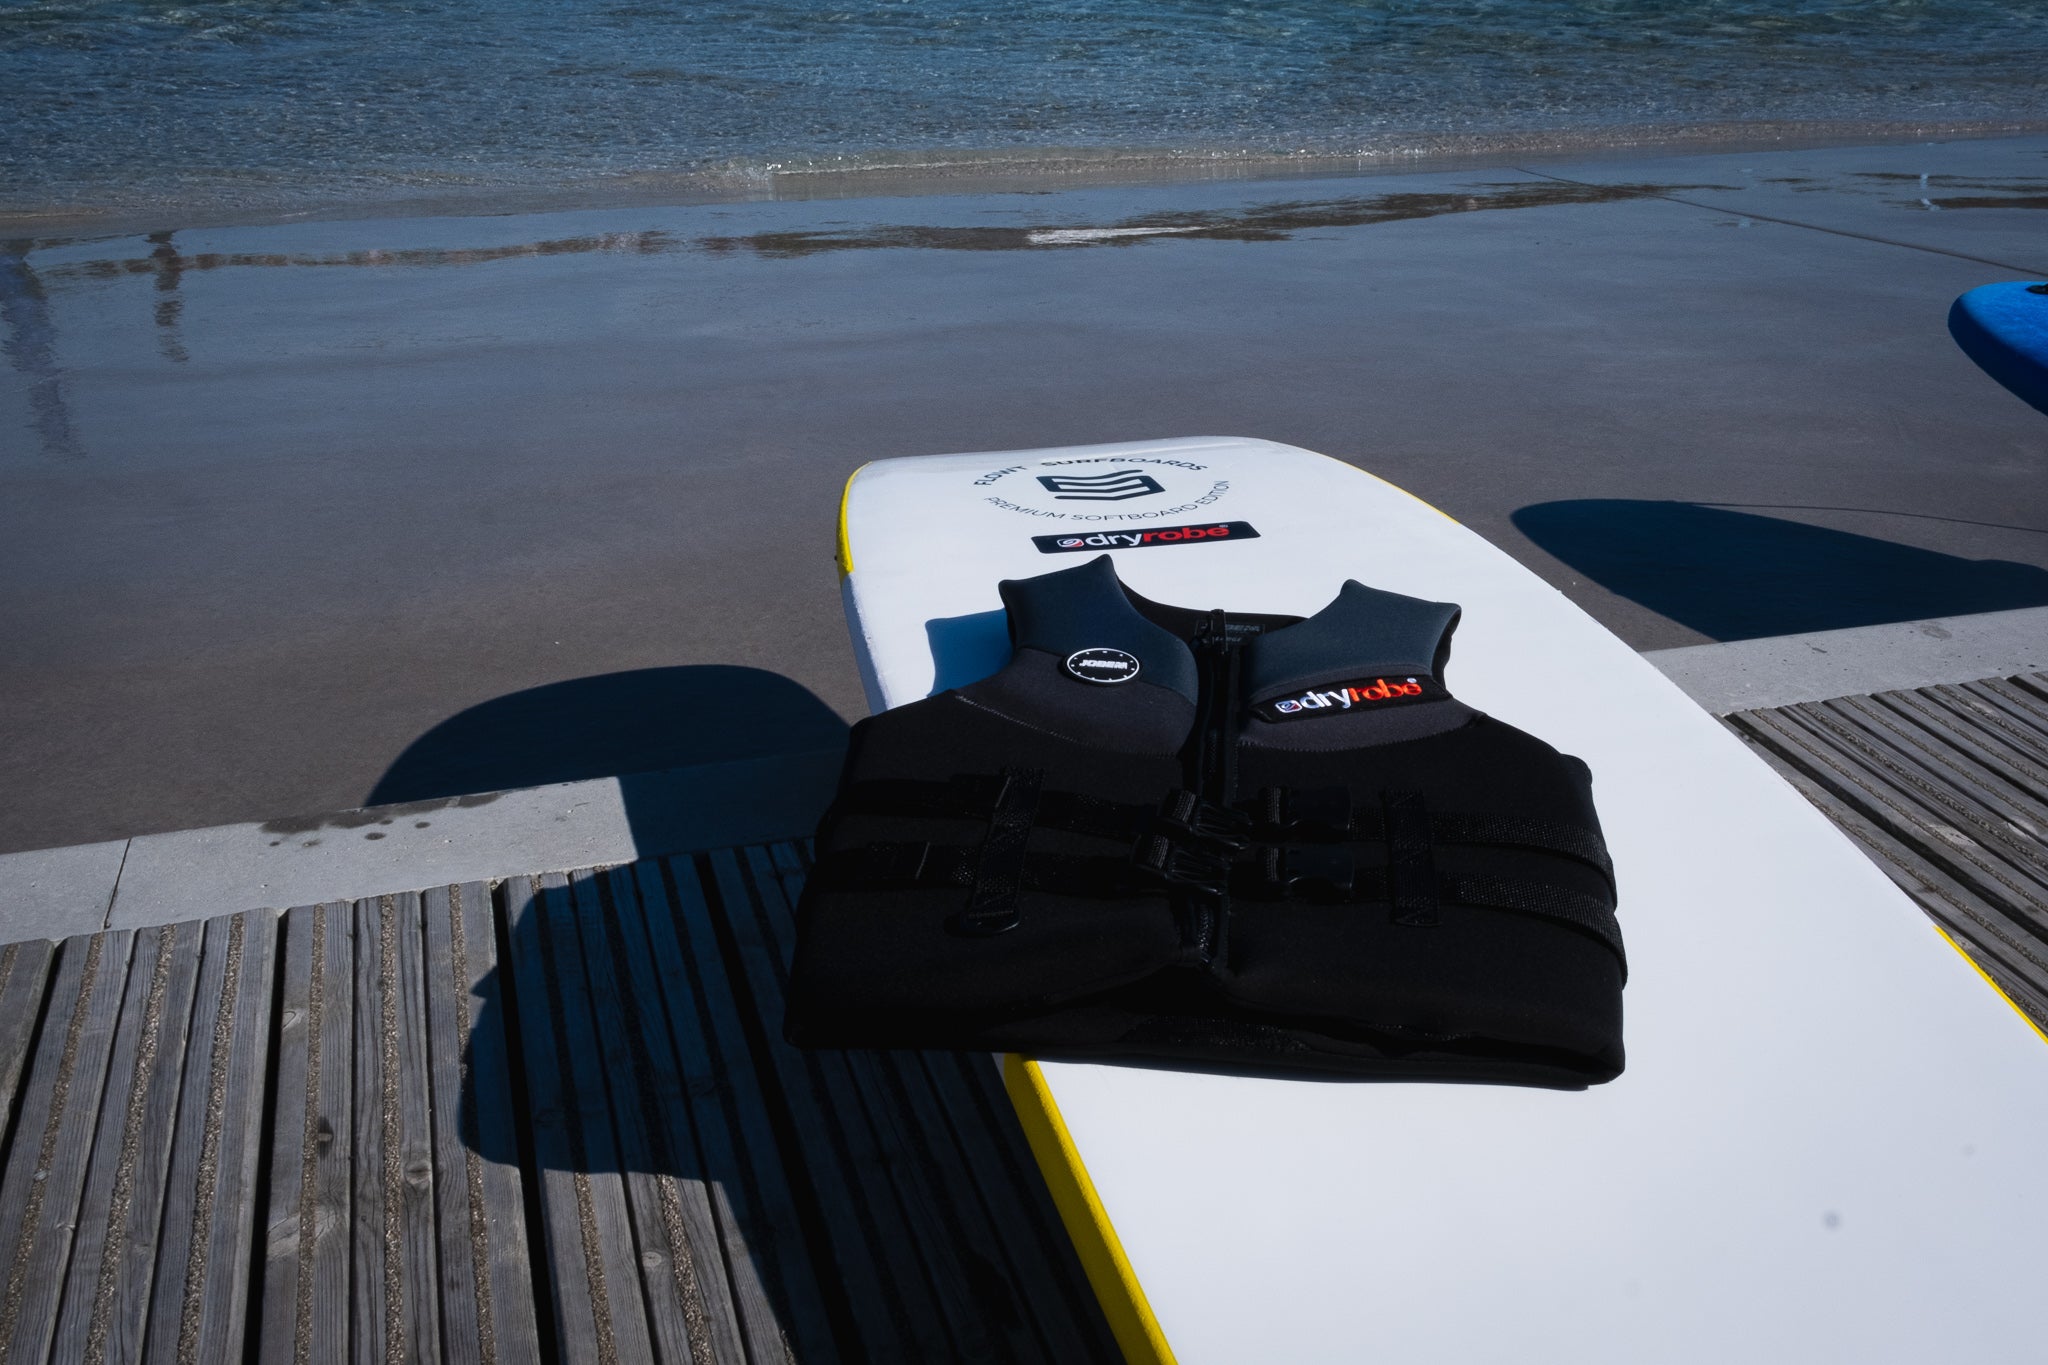 dryrobe branded Adaptive surfer board and vest, by the water at The Wave